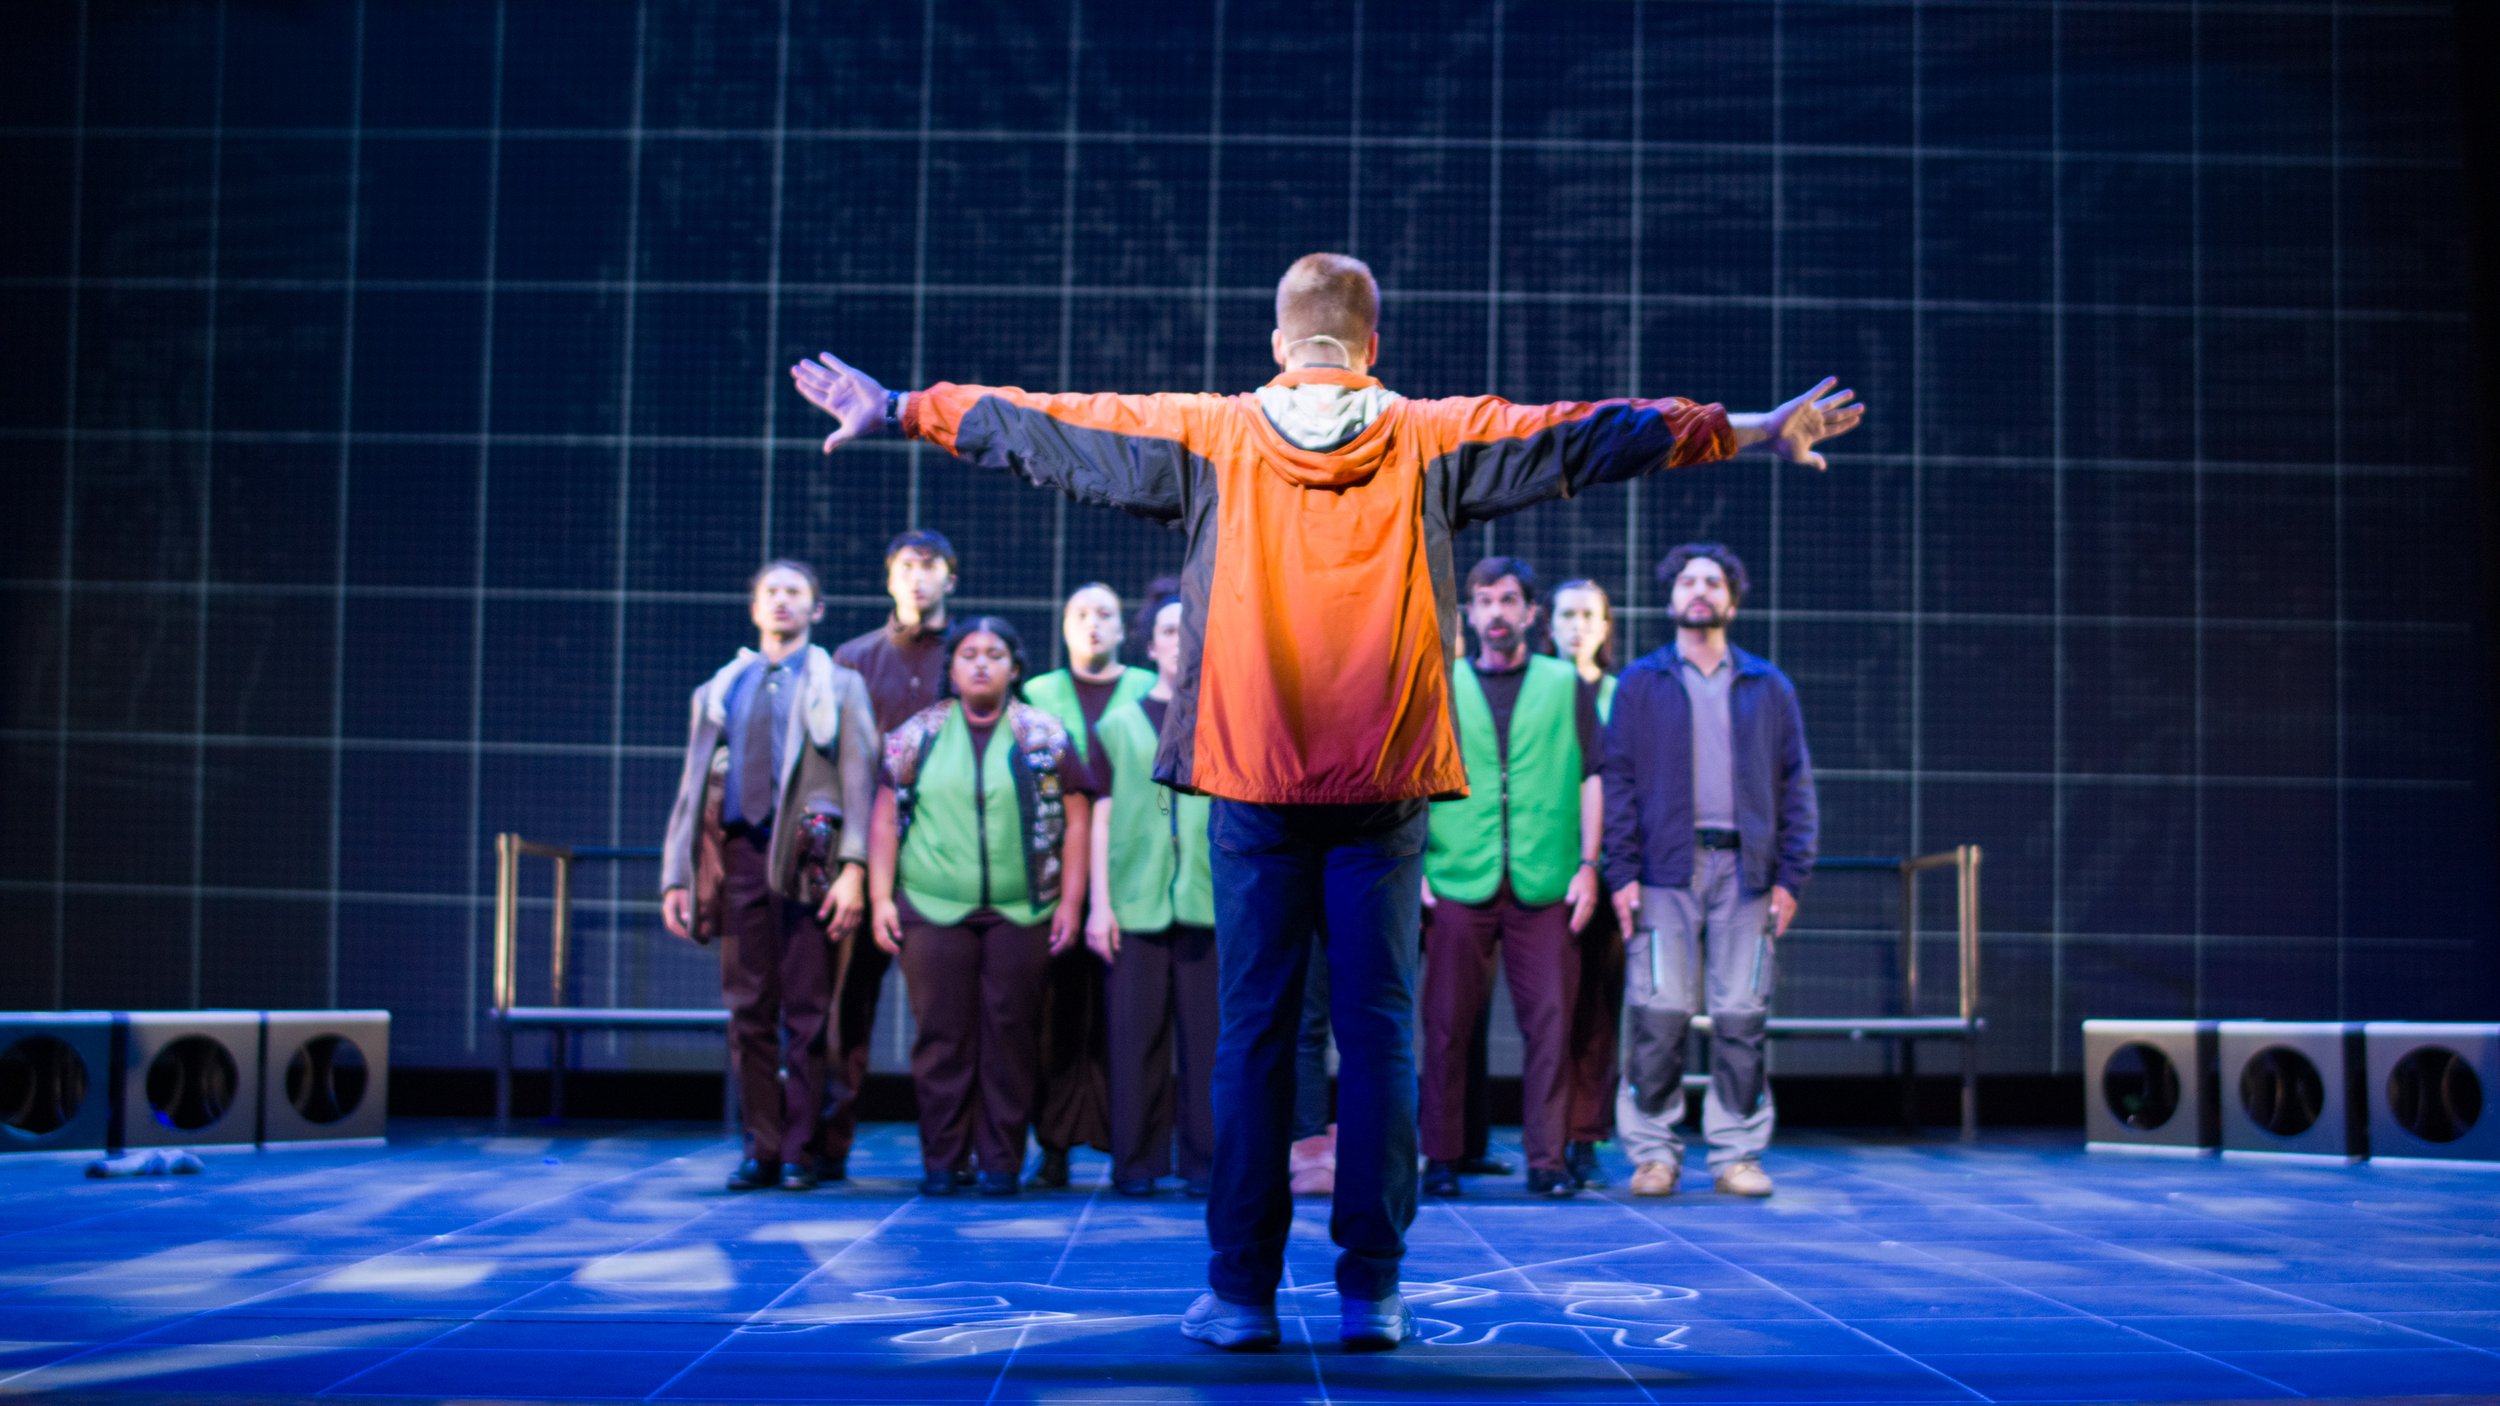  Justin Valine (center) and cast during last dress rehearsal before the first showing of "The Curious Incident of The Dog in The Night-Time" on Thursday, October 7th at Santa Monica College, Santa Monica, Calif. 